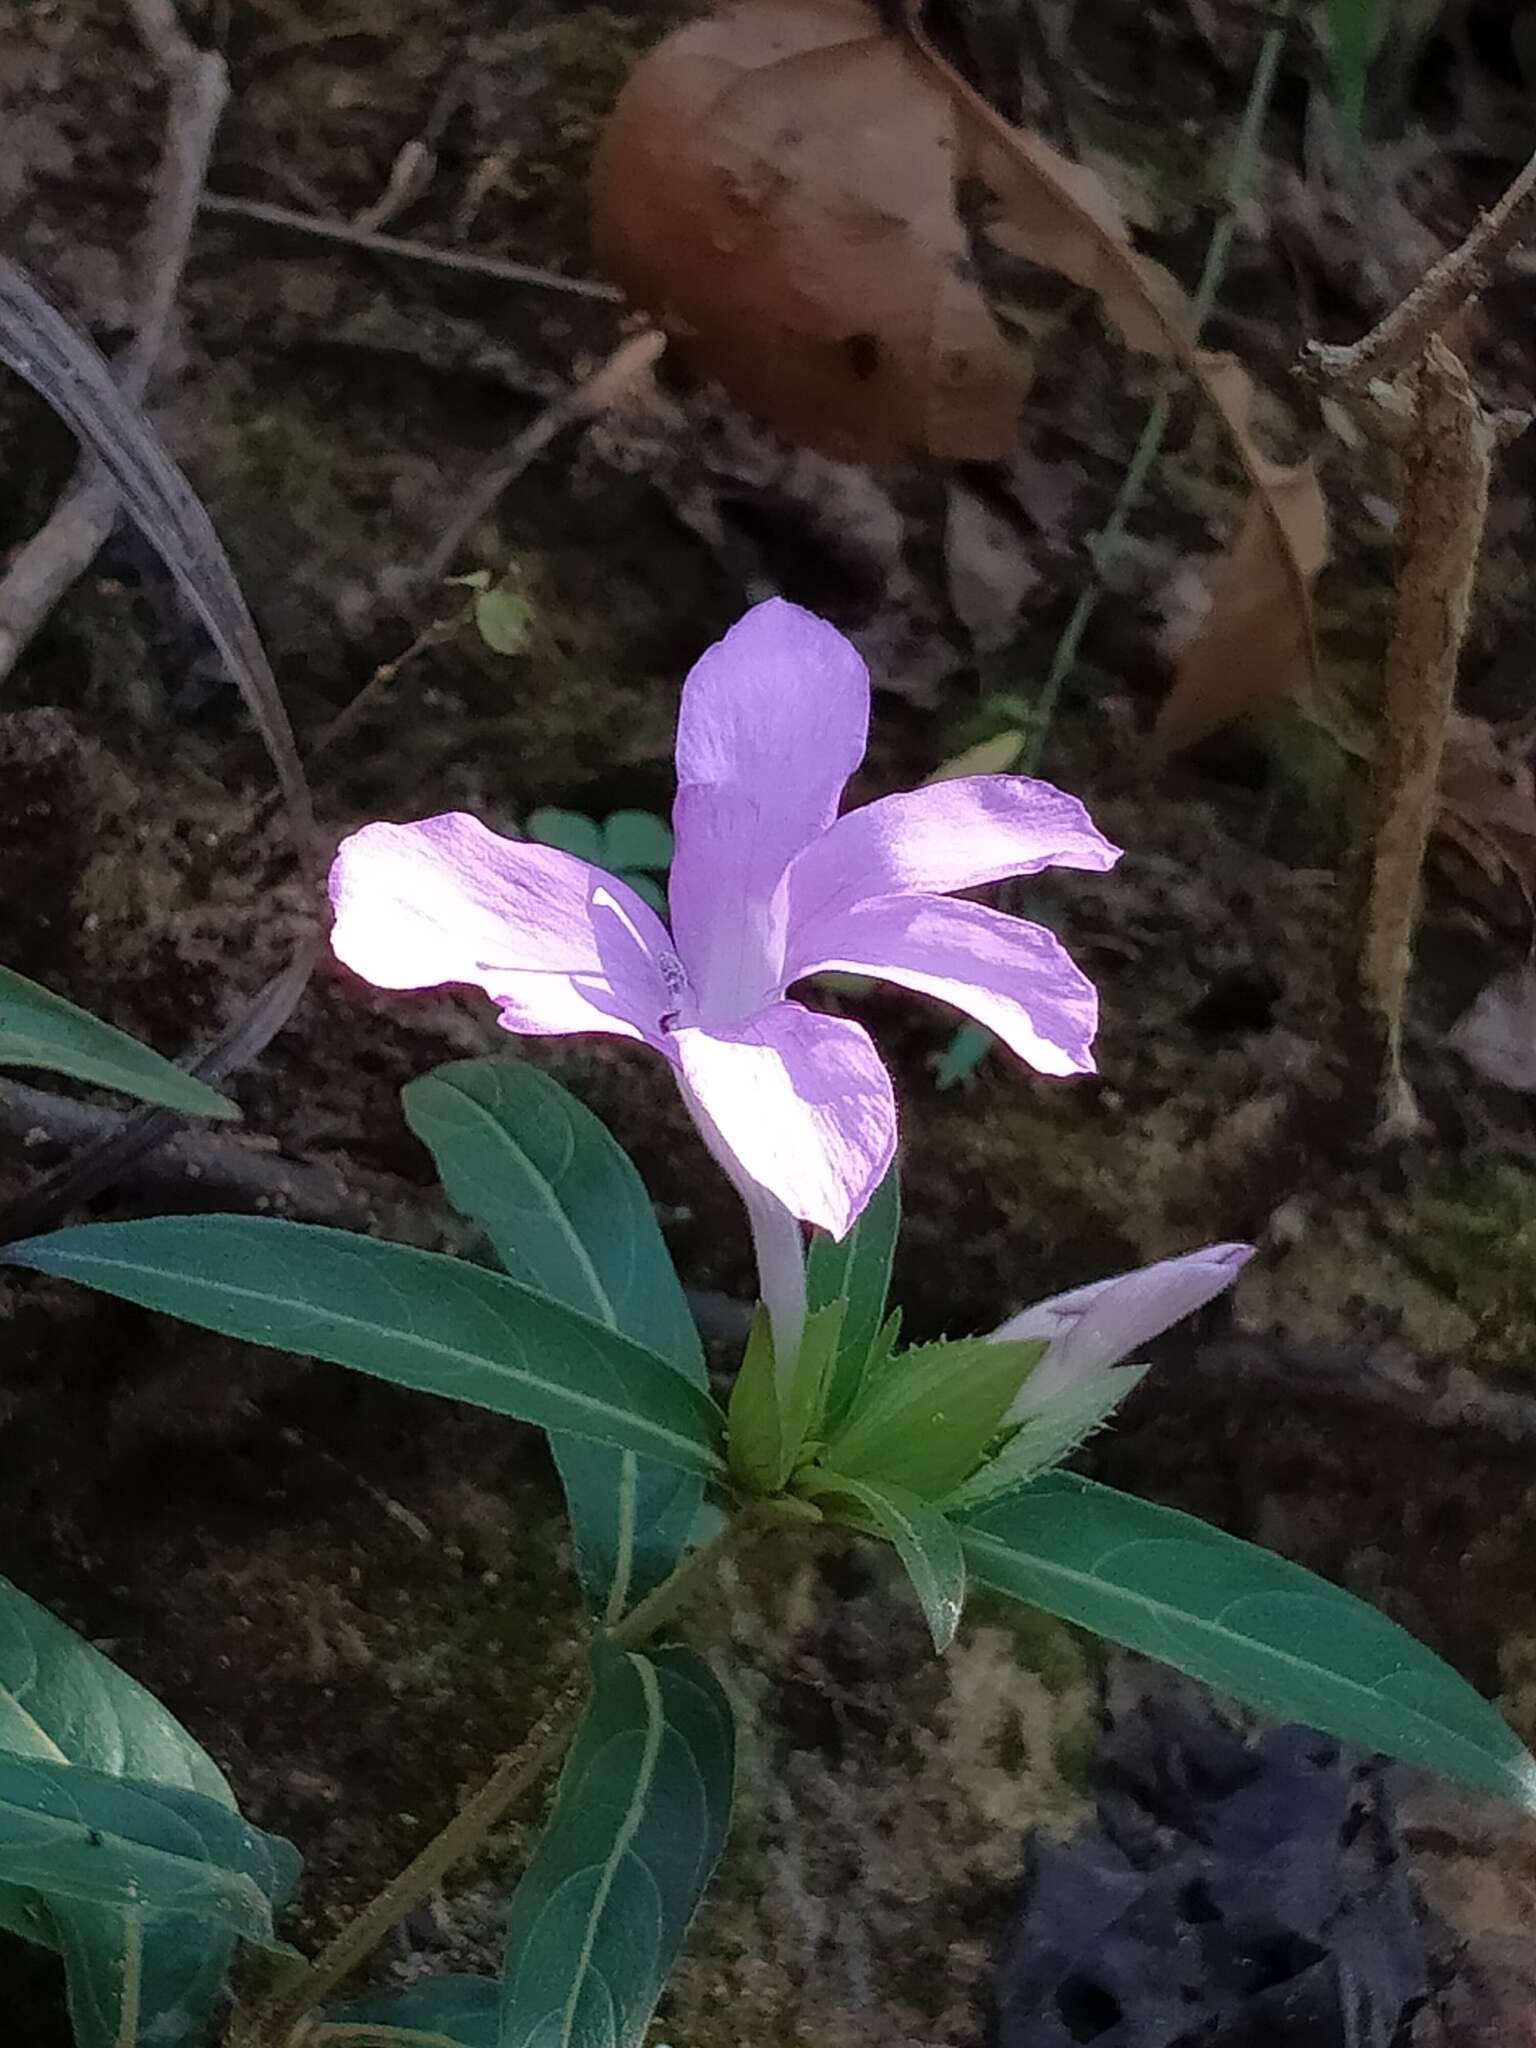 Image of crested Philippine violet